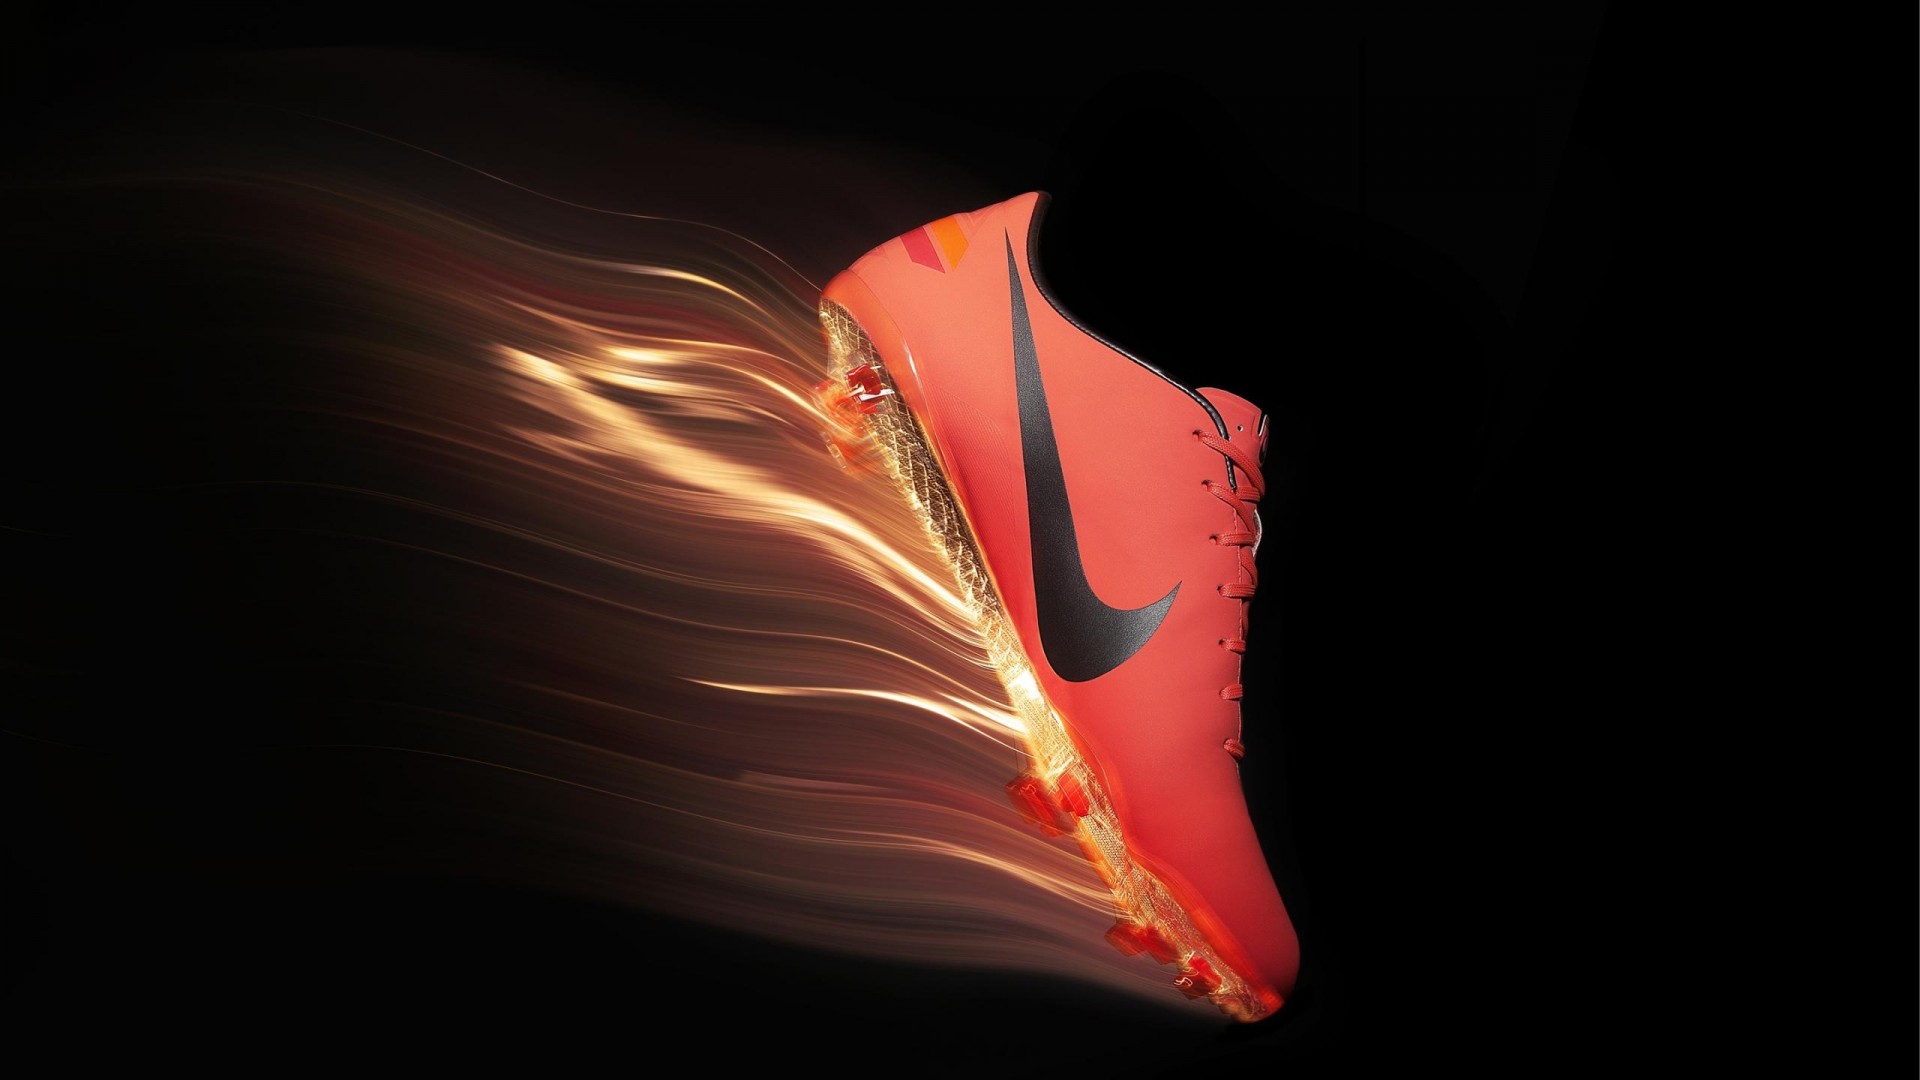 Red Nike Football Shoes Wallpaper Desktop With